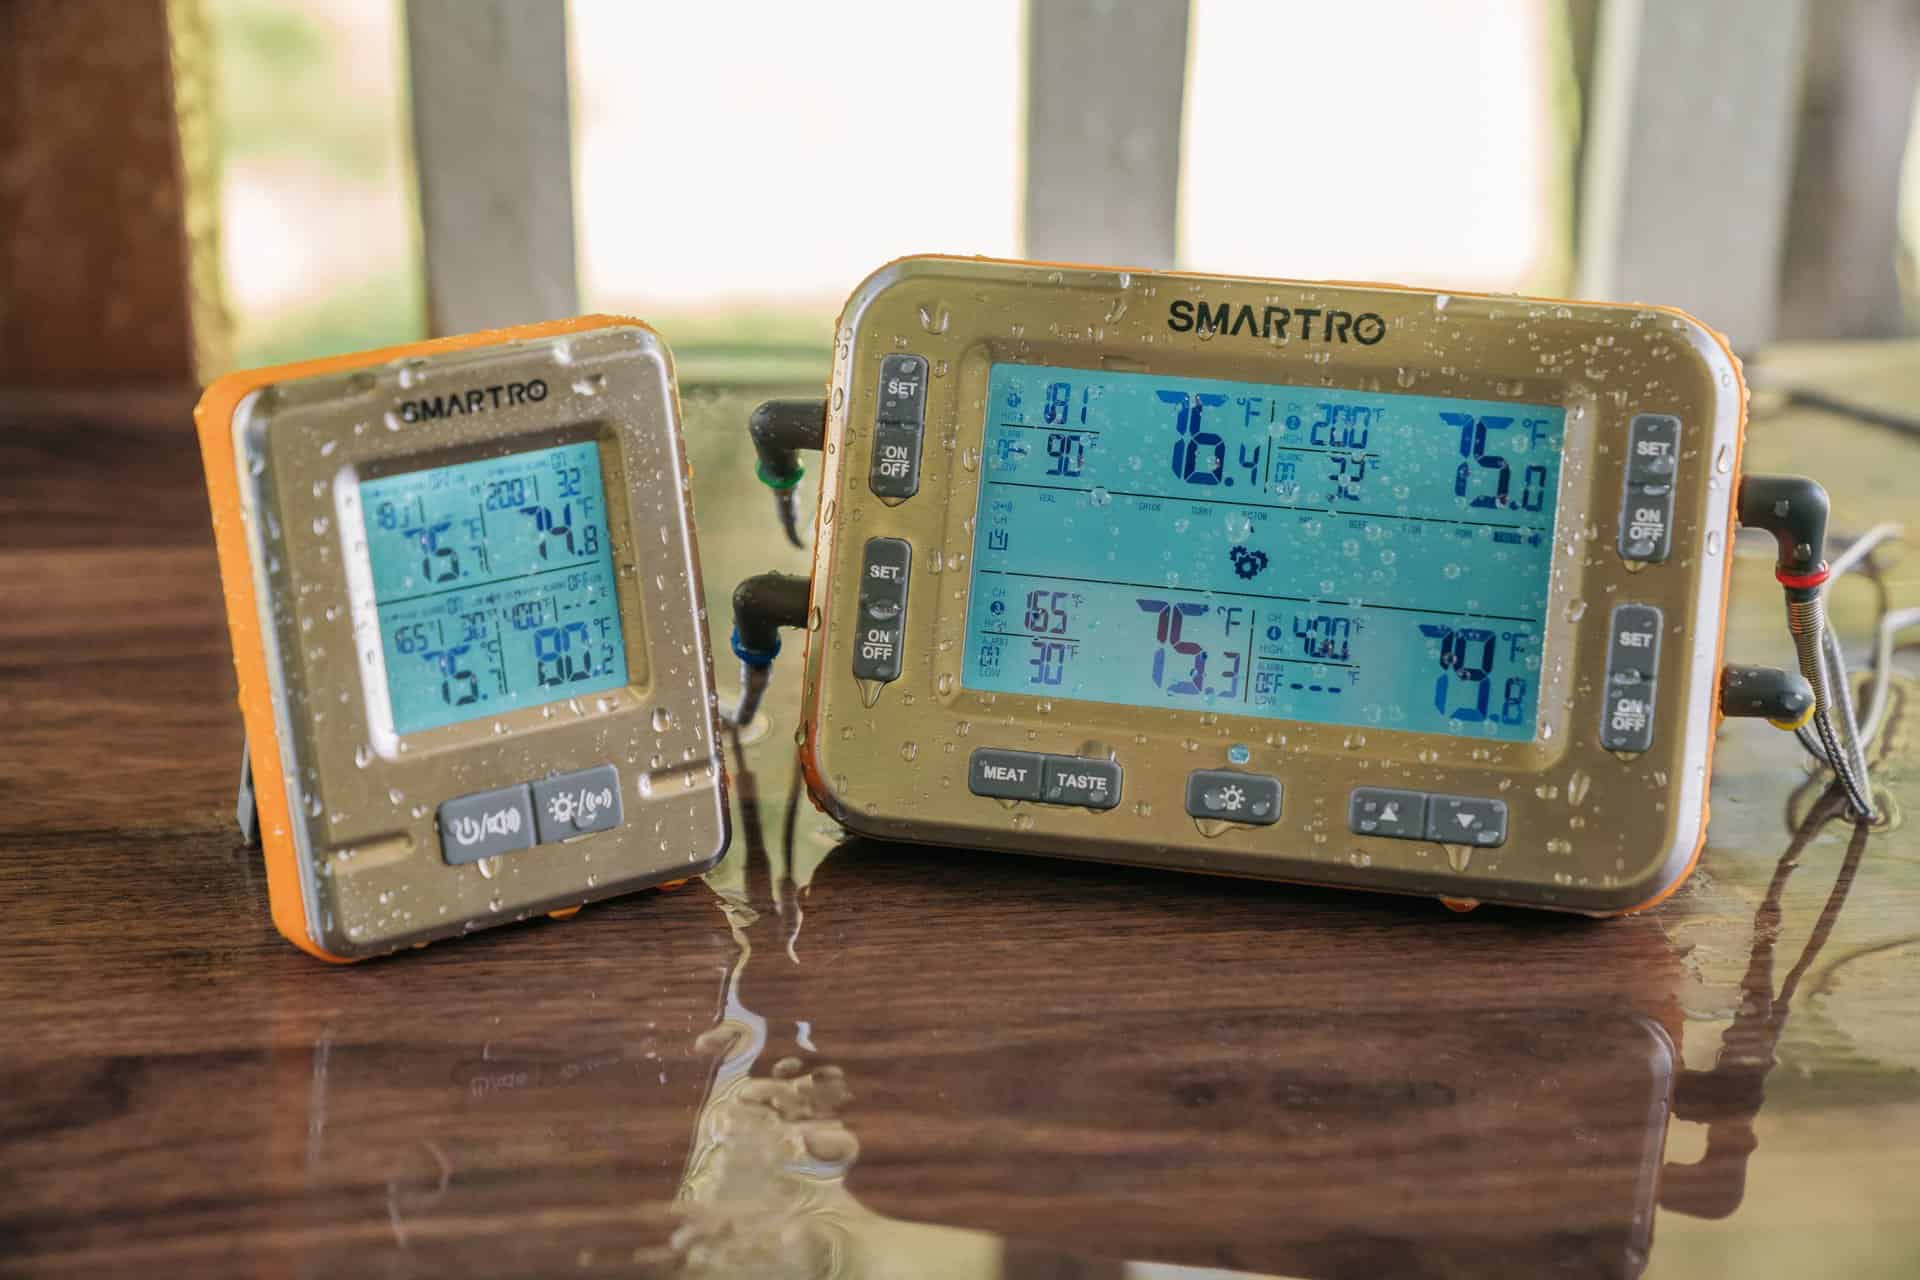 https://www.chefstemp.com/wp-content/uploads/2022/10/smartro-X50-Wireless-Meat-Thermometer-4-Probes-3-scaled.jpg